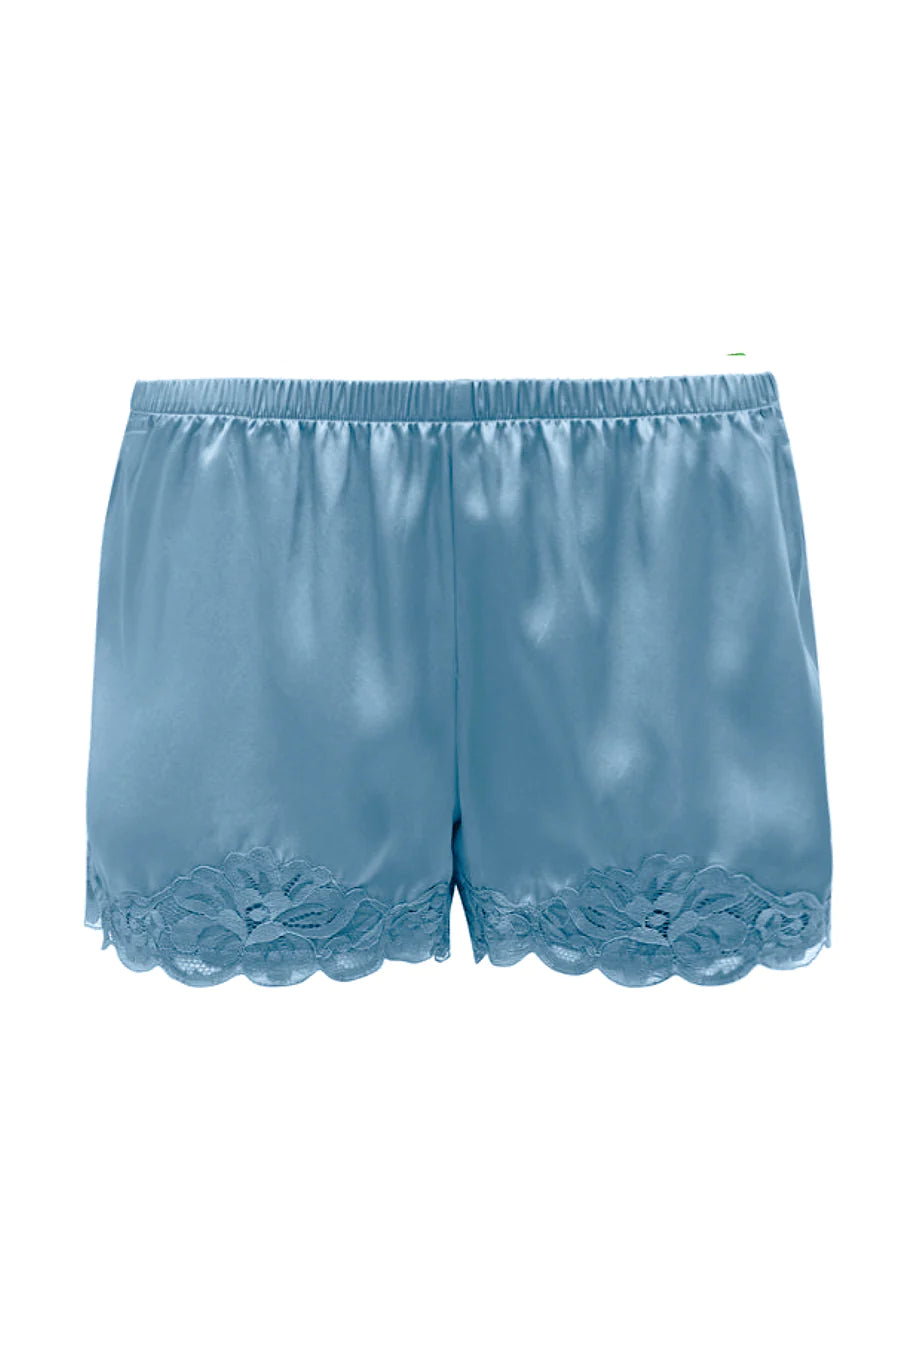 Floral Lace Shorts in Baltic Blue